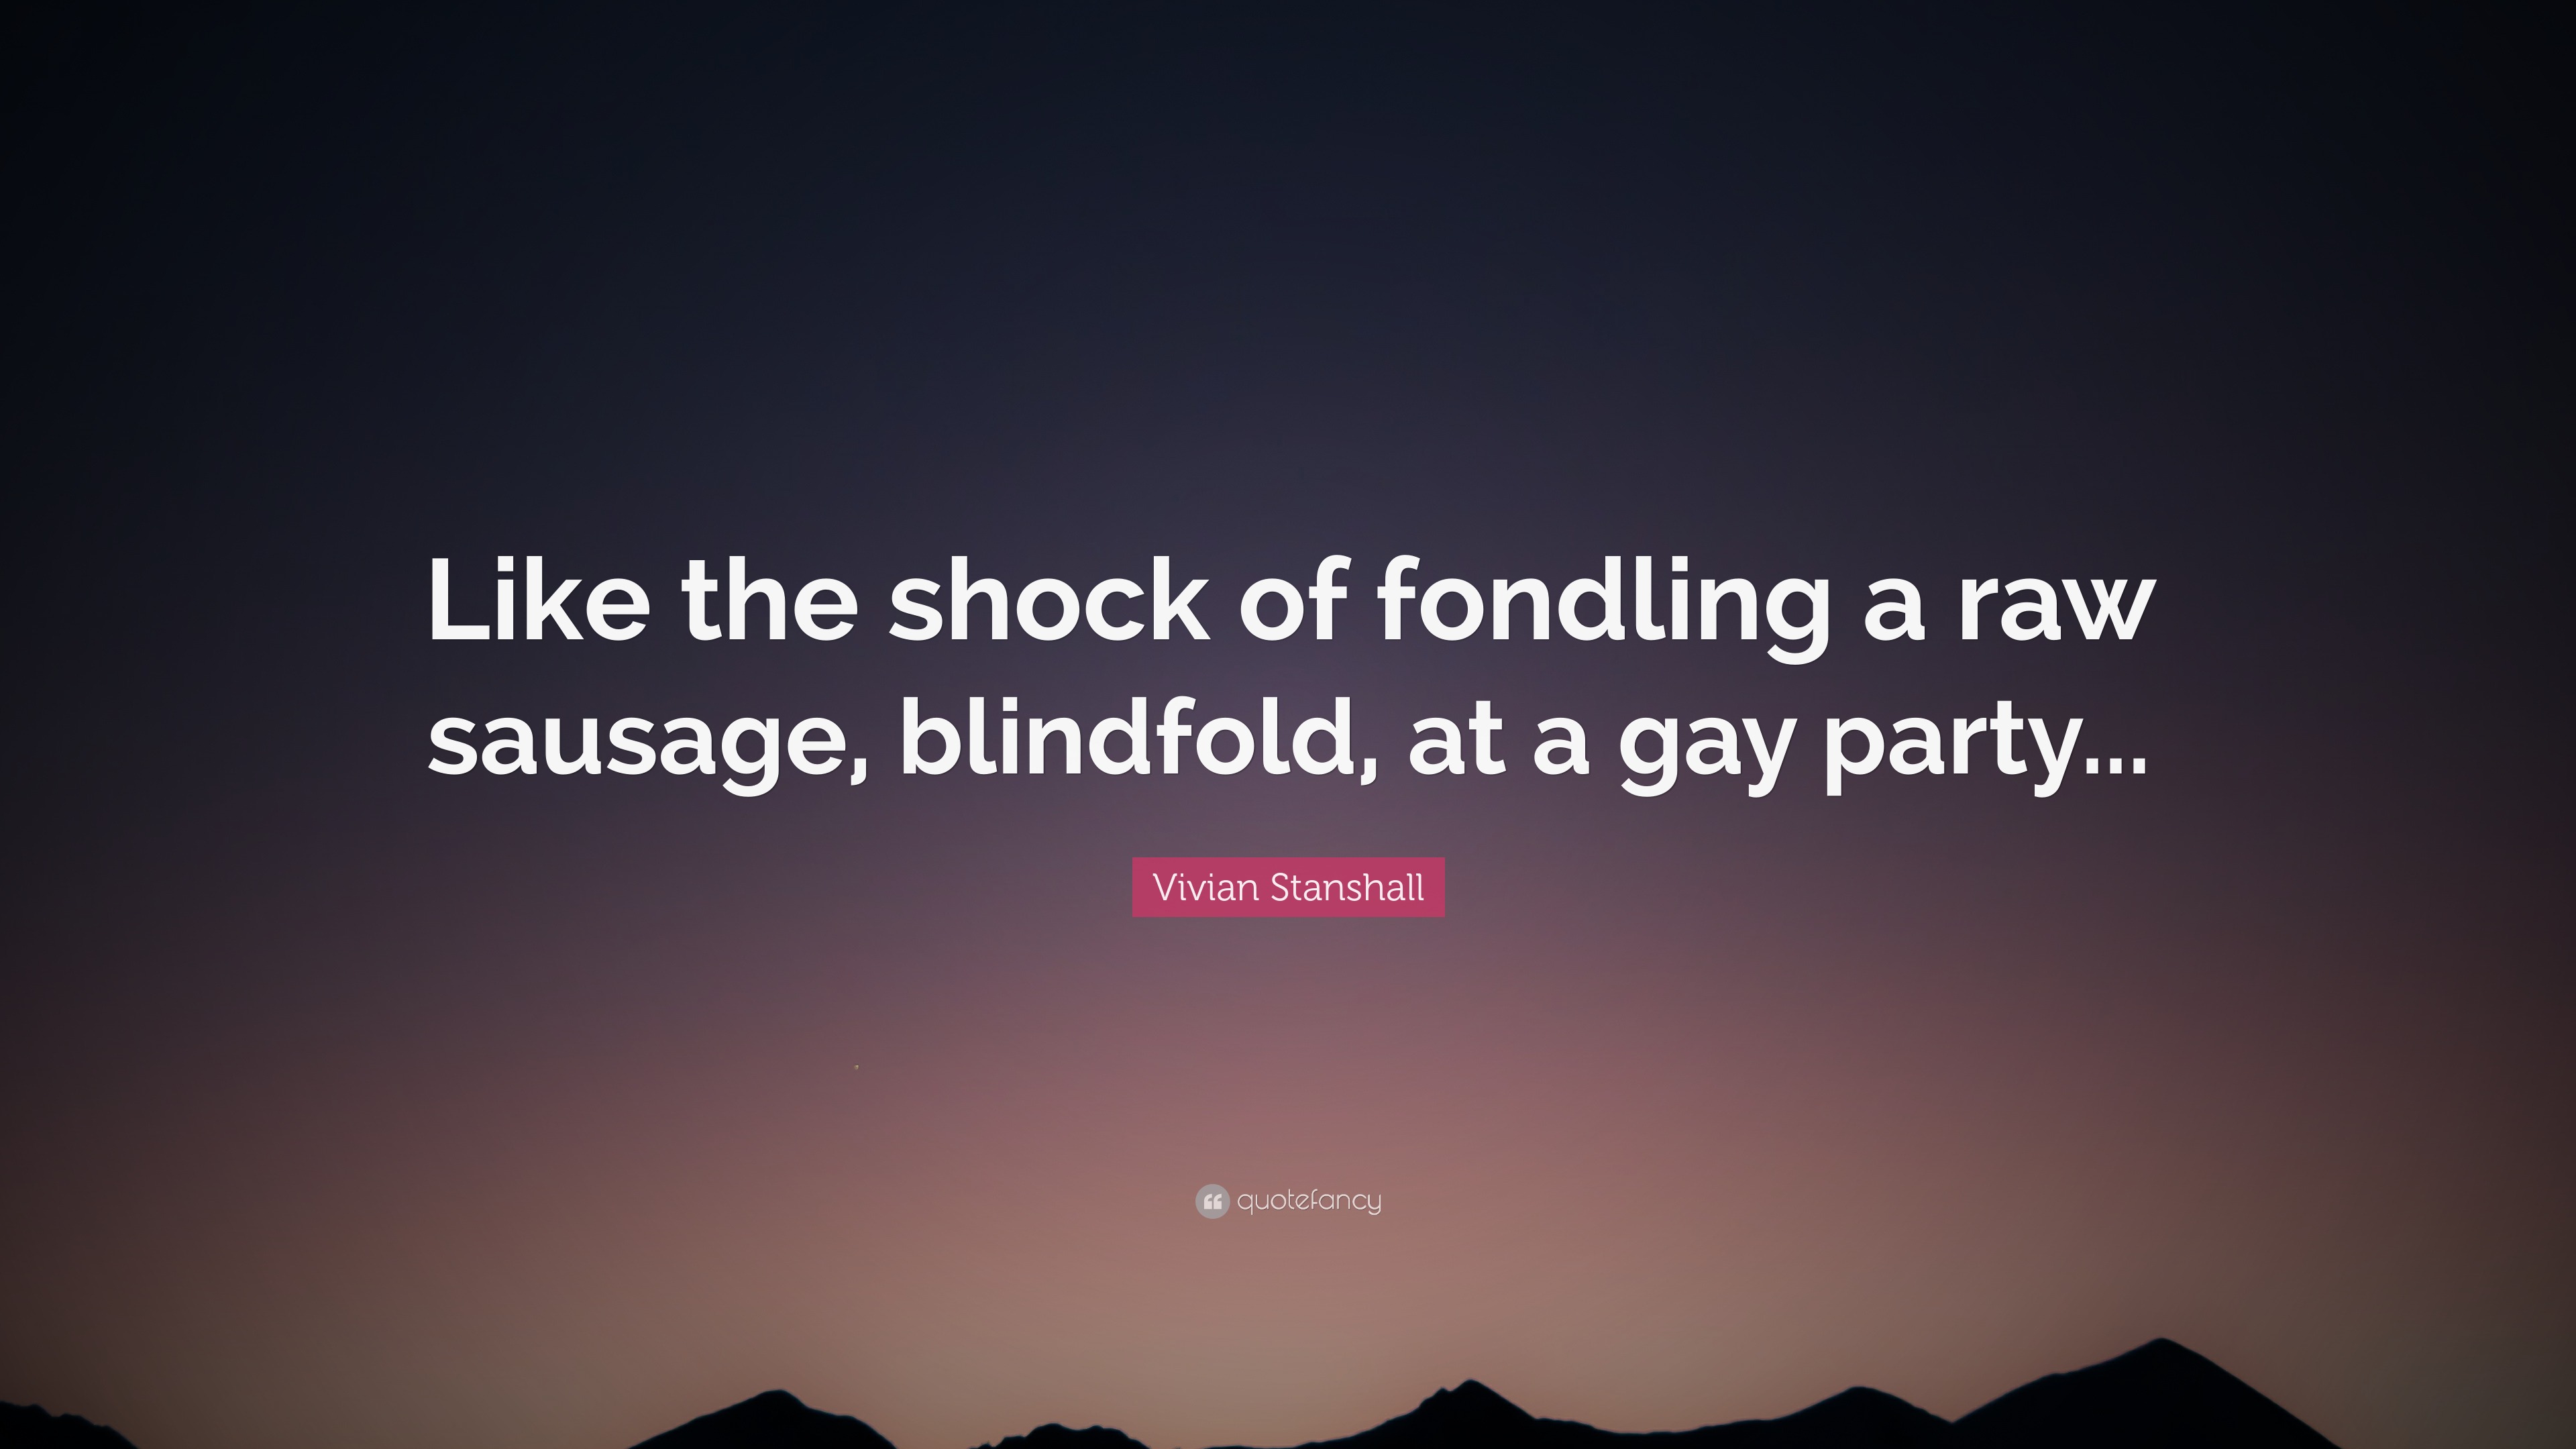 Vivian Stanshall Quote Like The Shock Of Fondling A Raw Sausage Images, Photos, Reviews